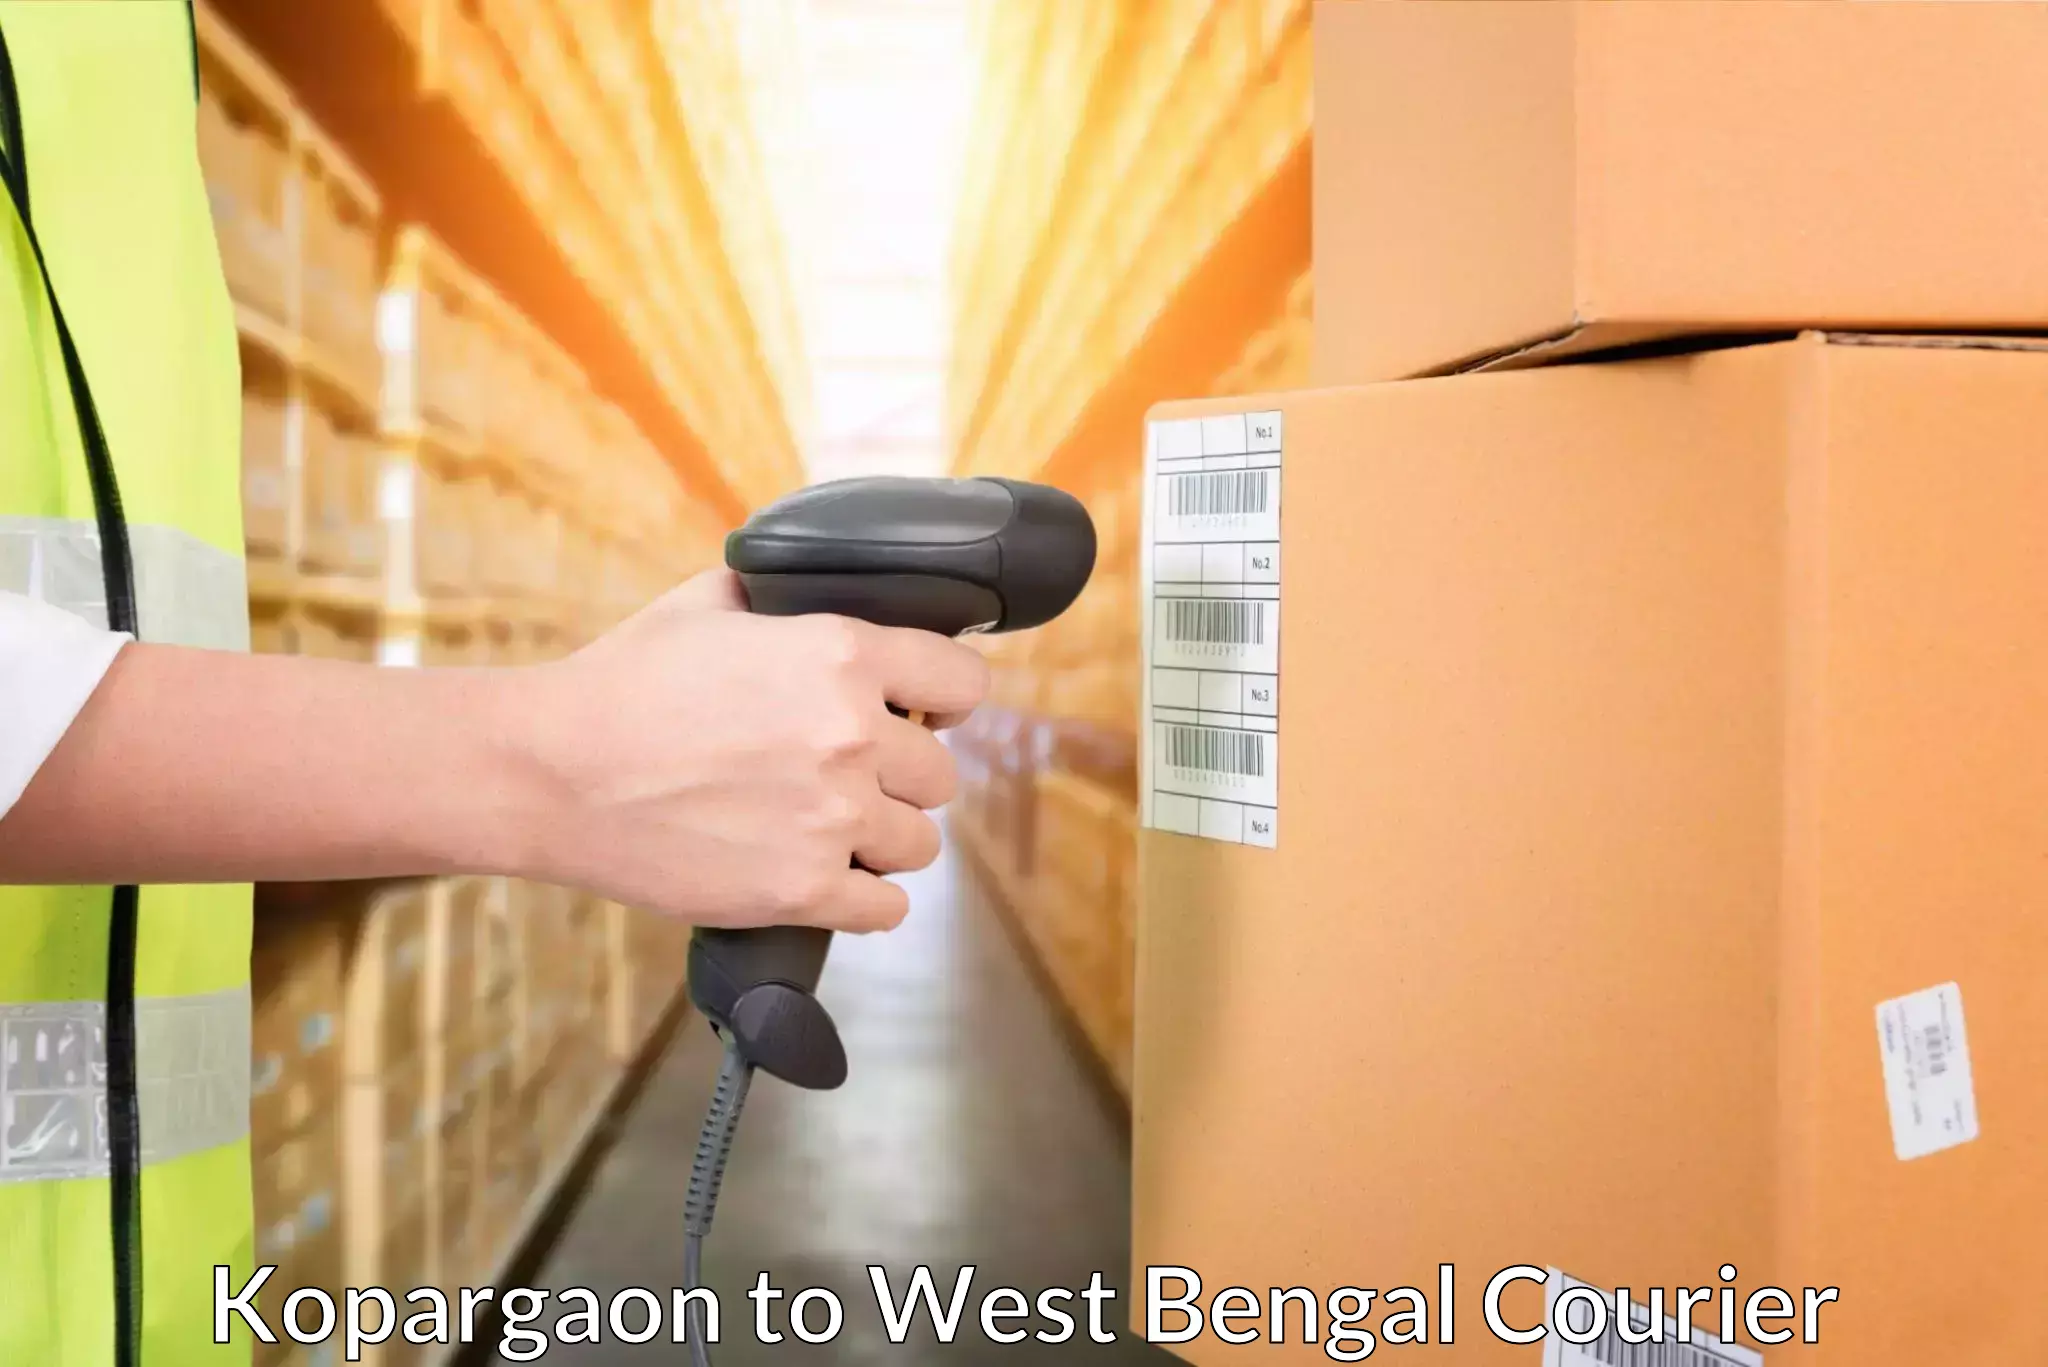 Package delivery network Kopargaon to Barrackpore